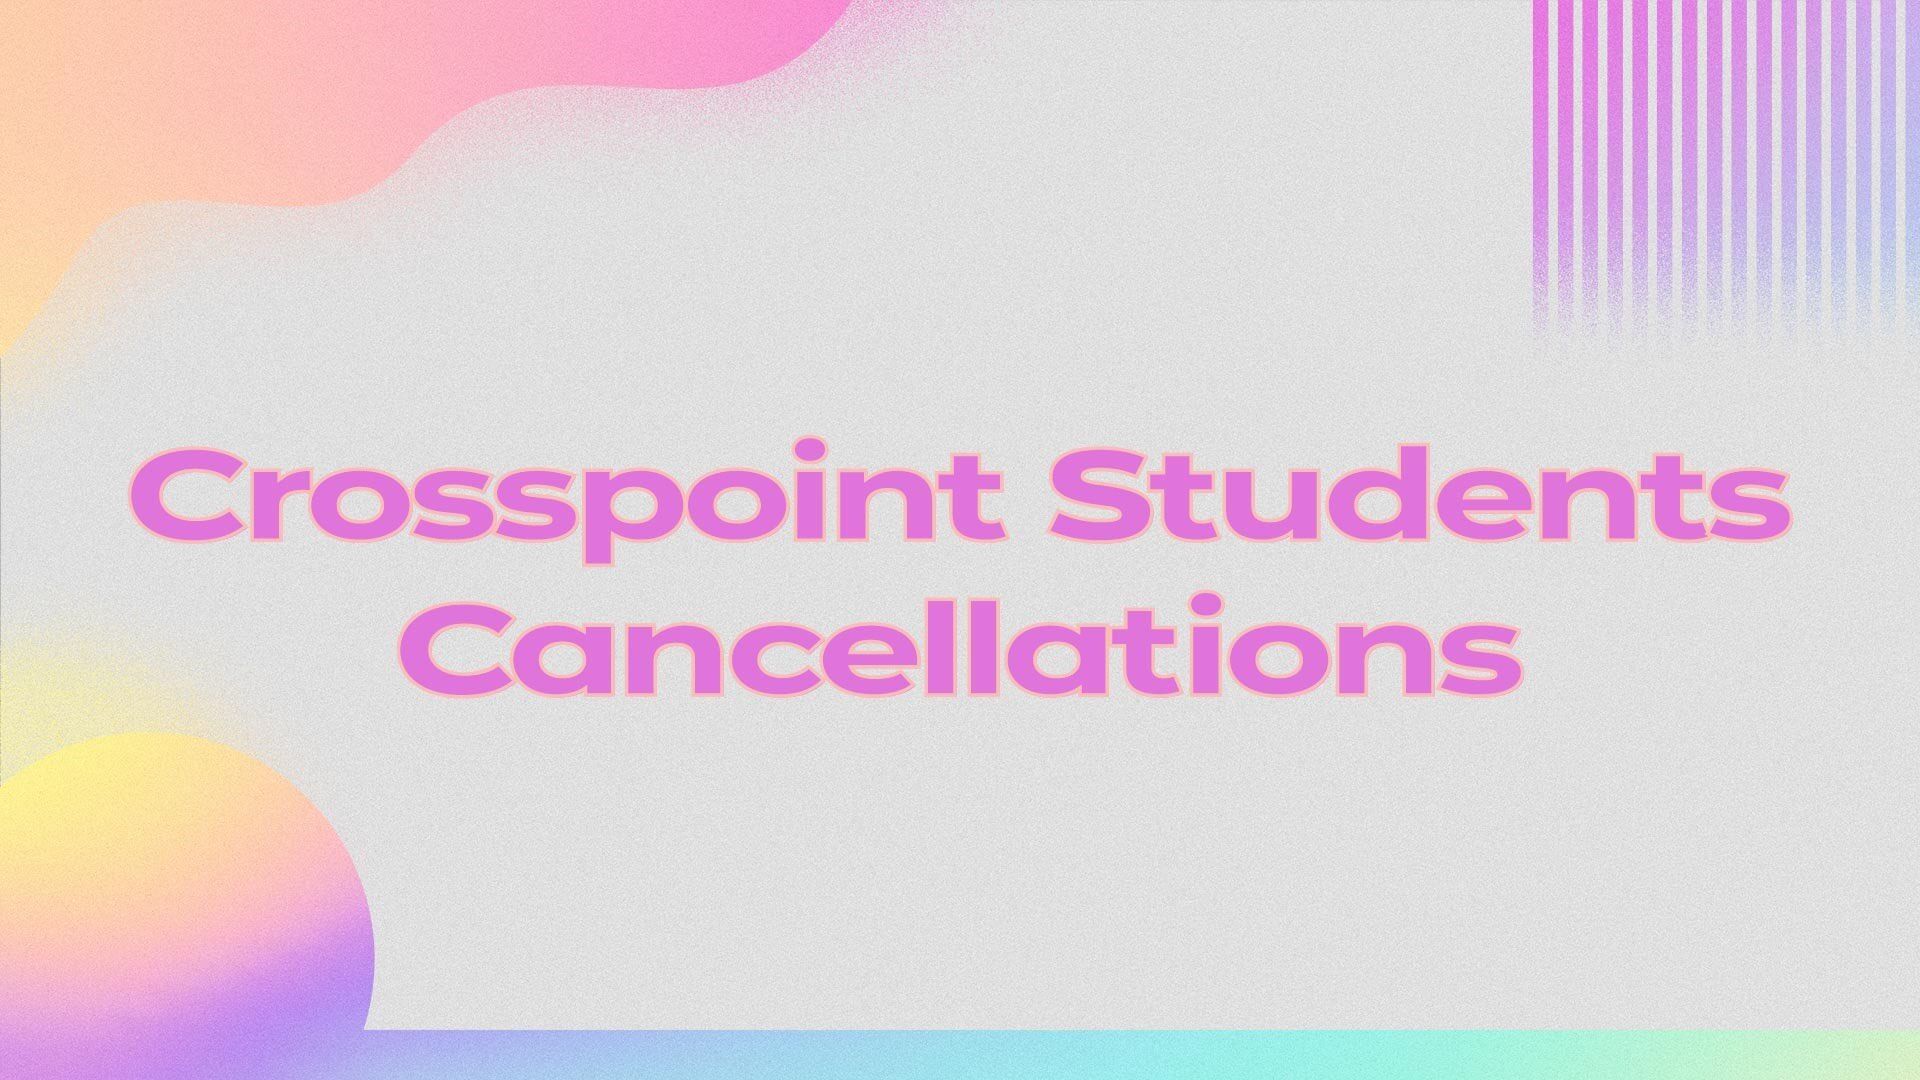 Crosspoint Students Cancellations